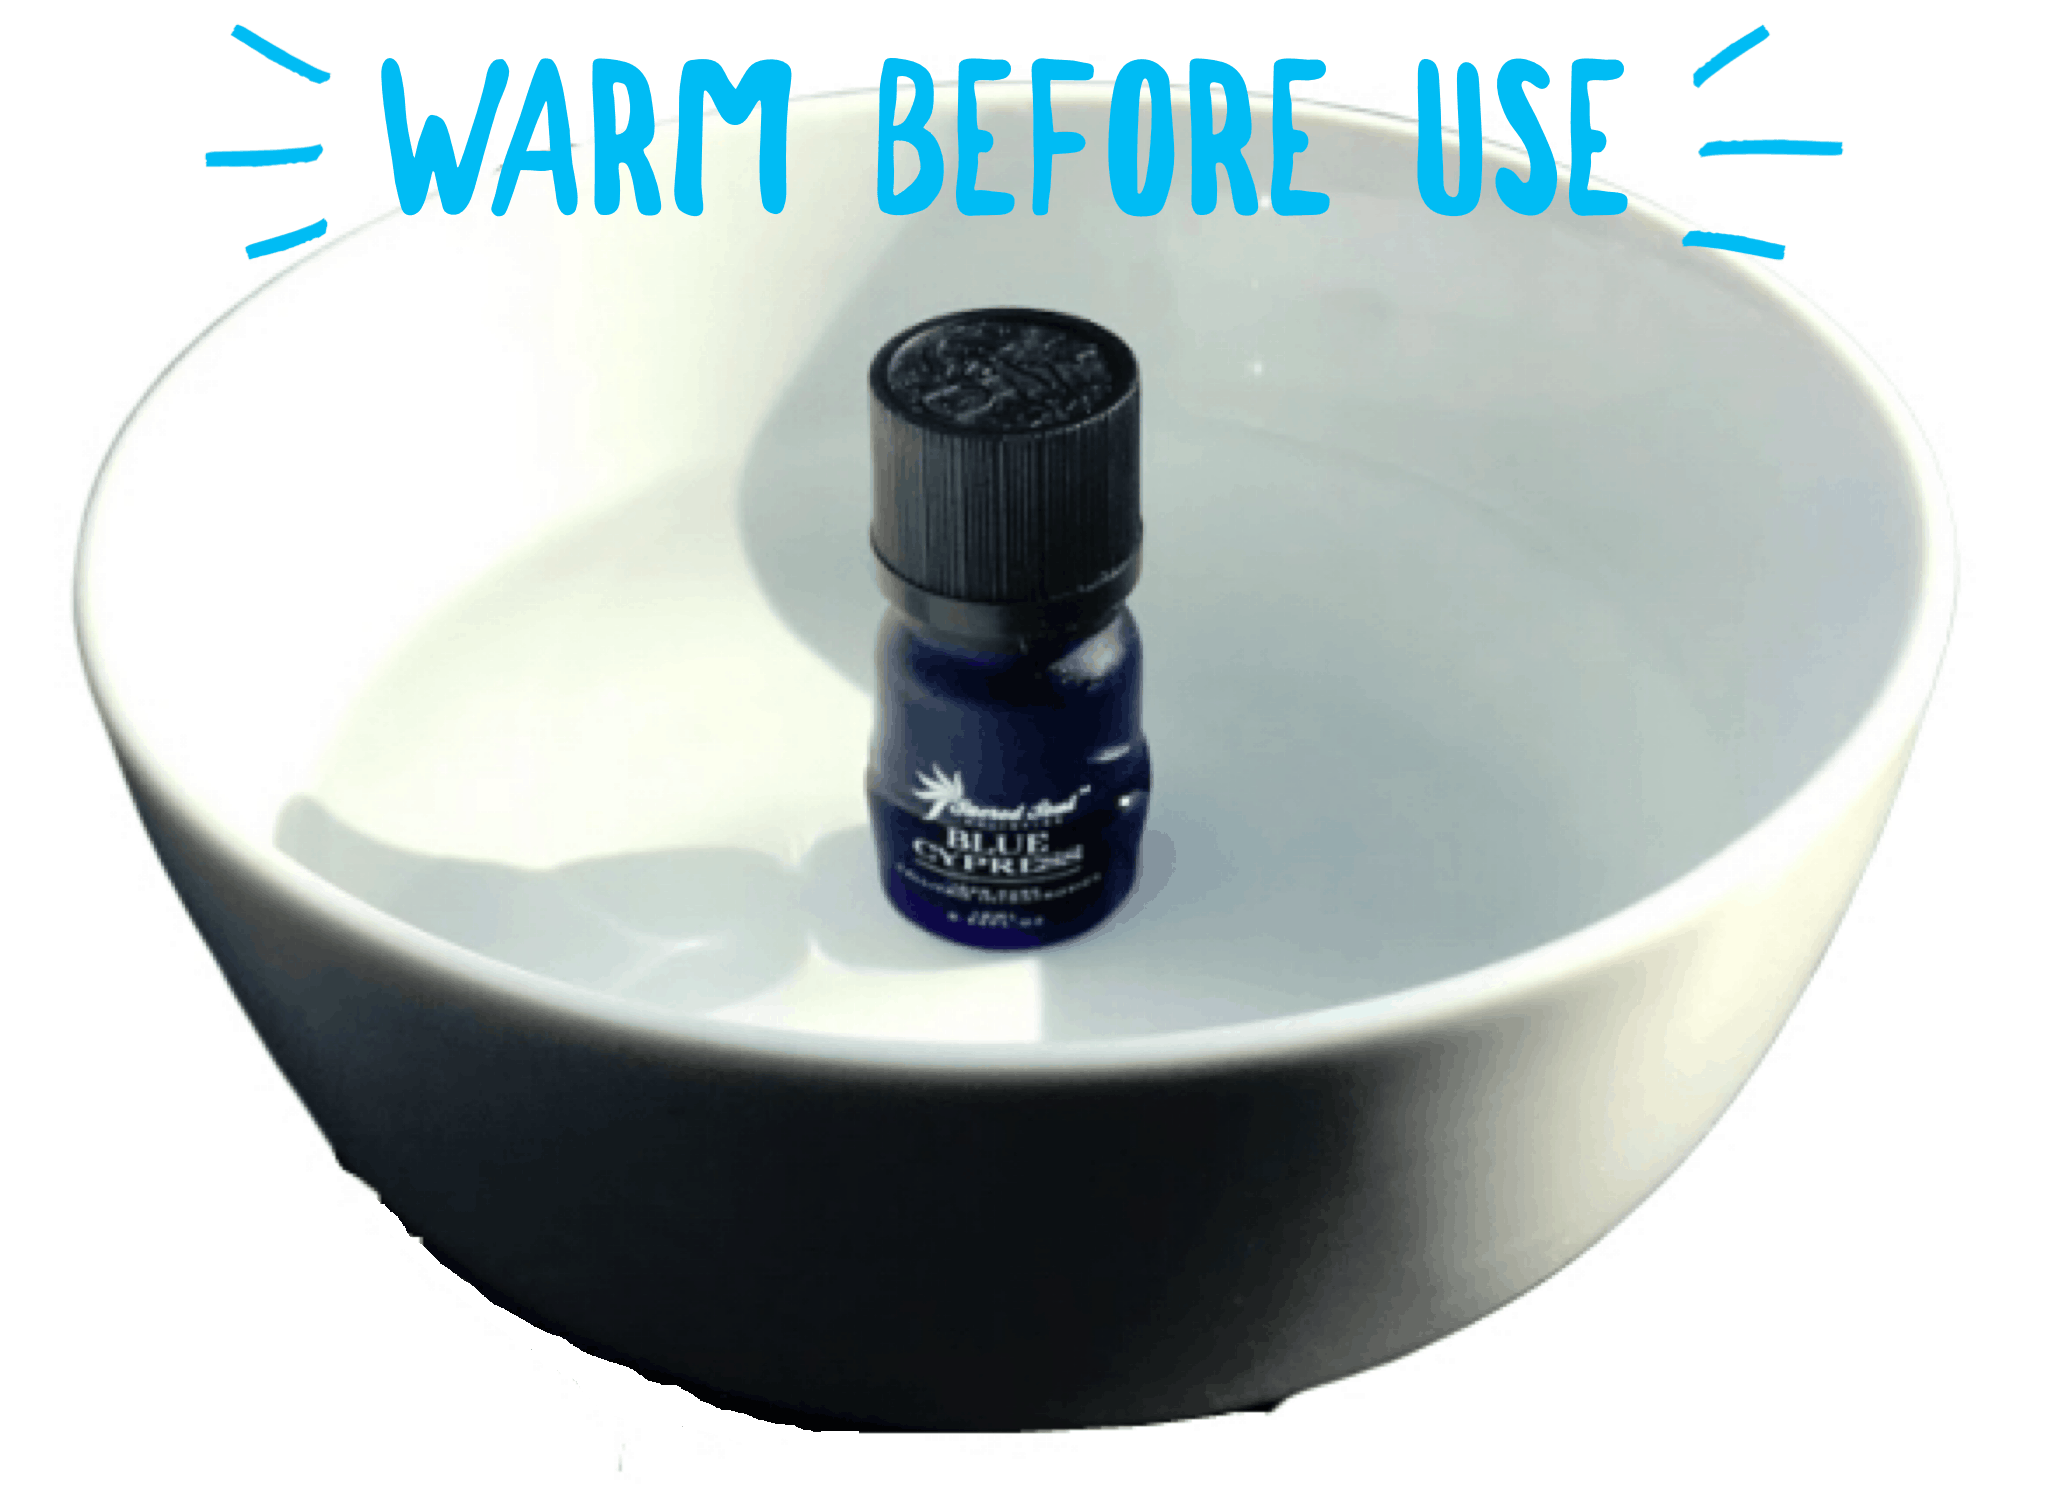 warm blue cypress oil in a bowl of water before use